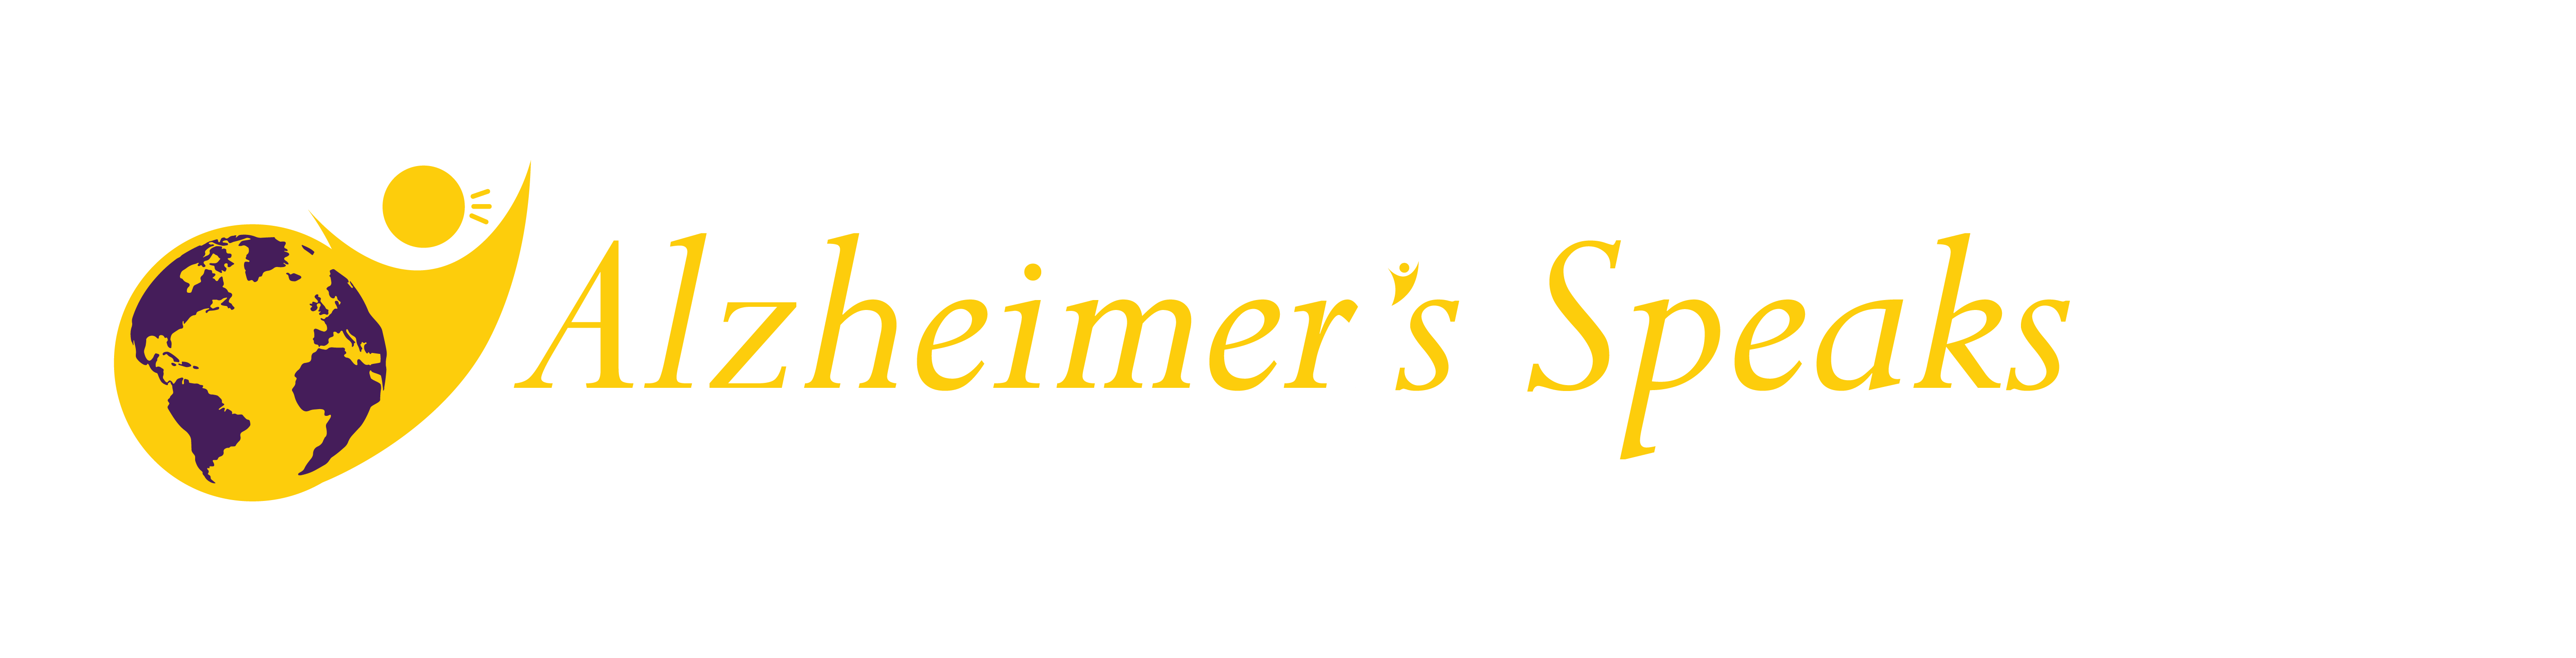 Alzheimer’s Speaks - Shifting Our Dementia Care Culture From Crisis to Comfort